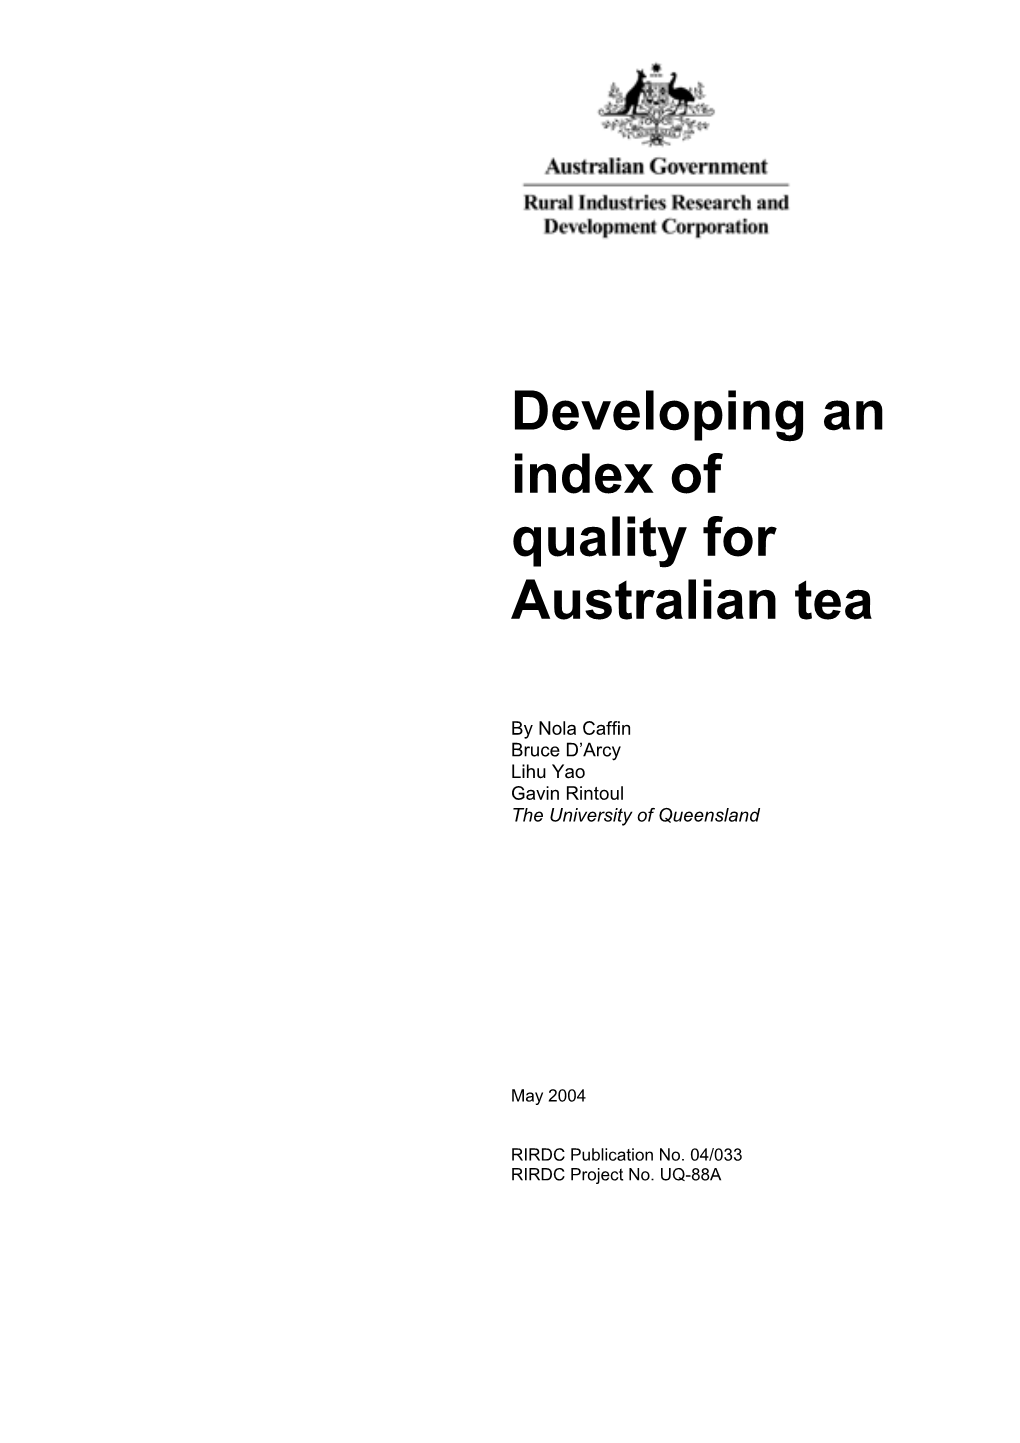 Developing an Index of Quality for Australian Tea